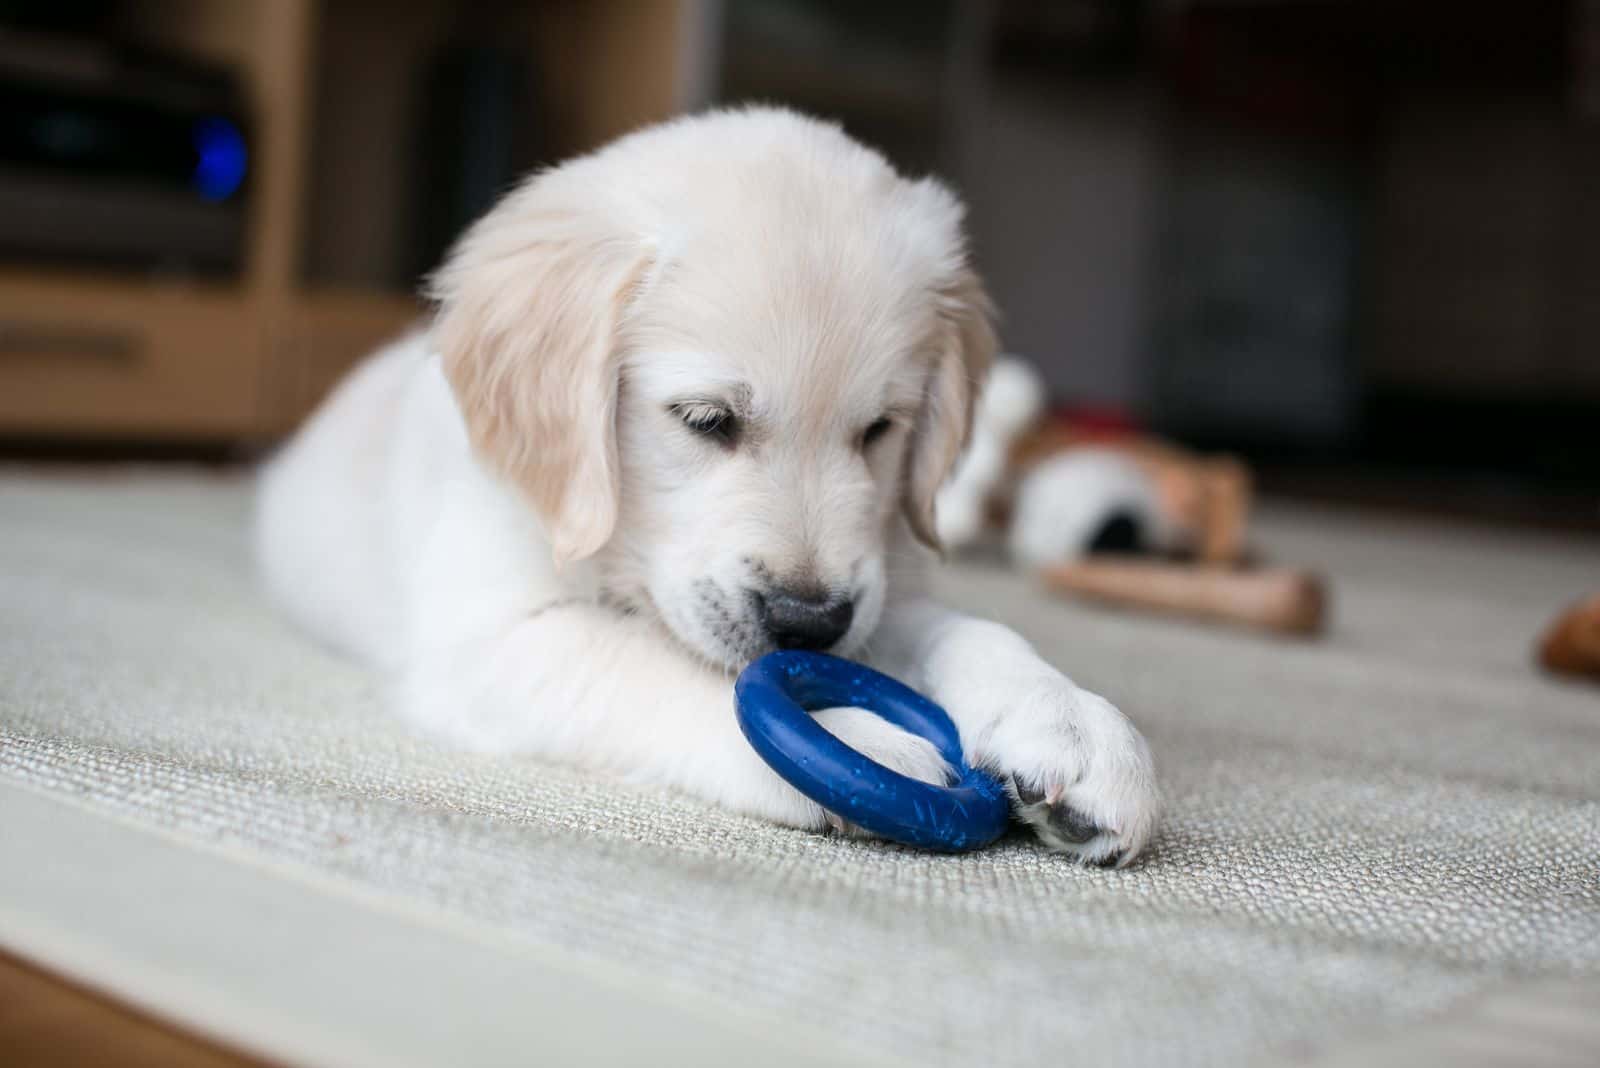 Golden retriever puppy playing at home on a carpet